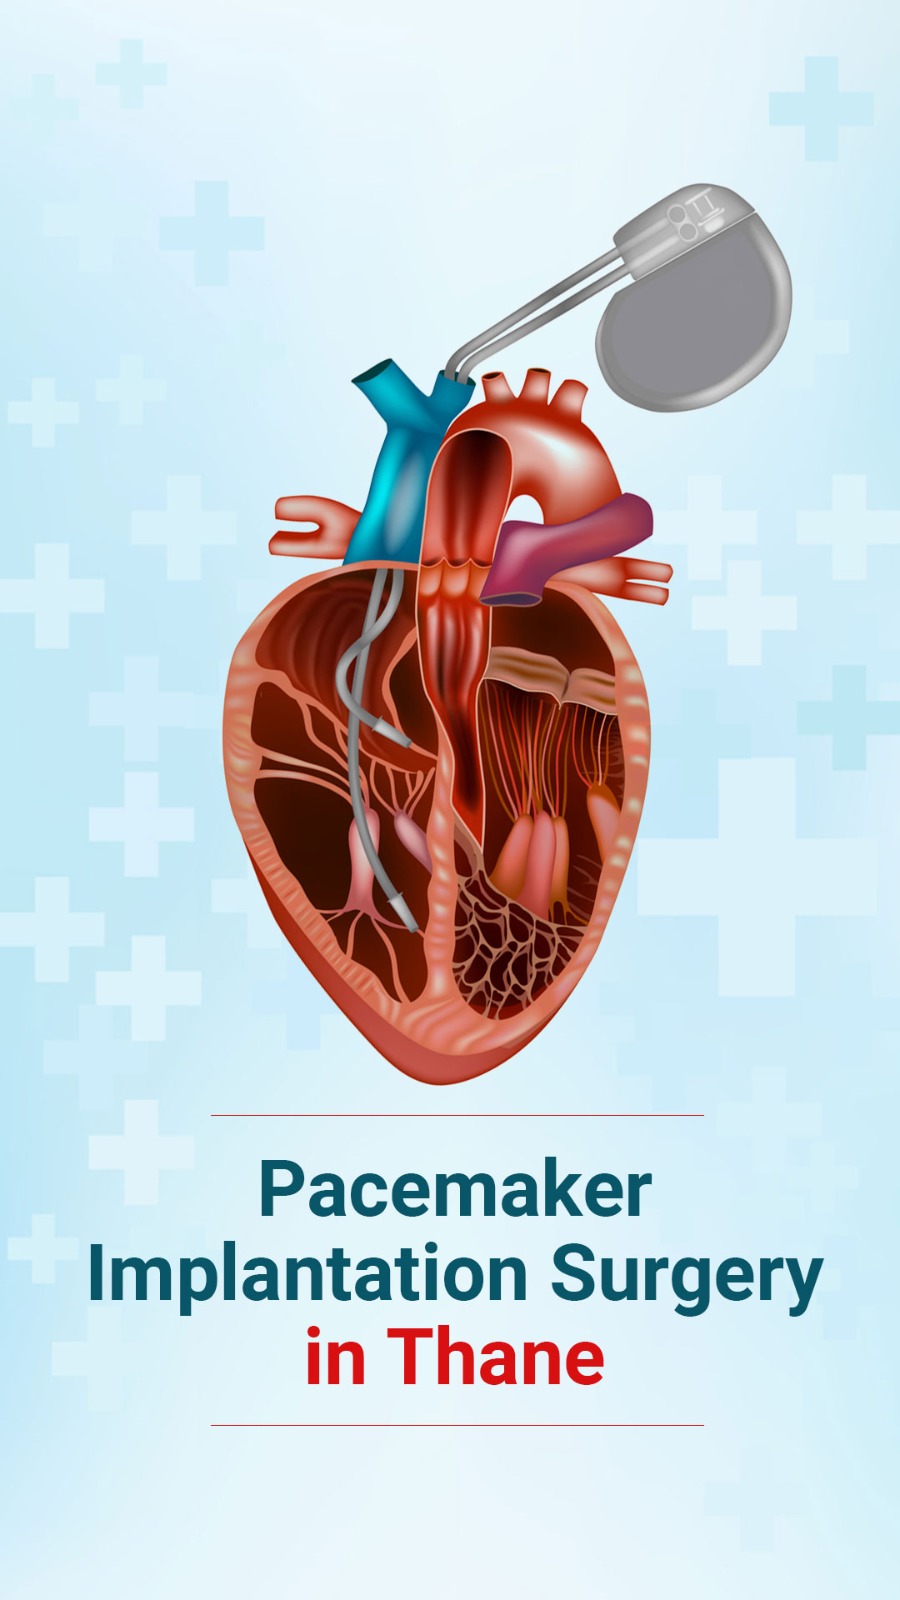 Pacemaker Implantation Surgery in Thane